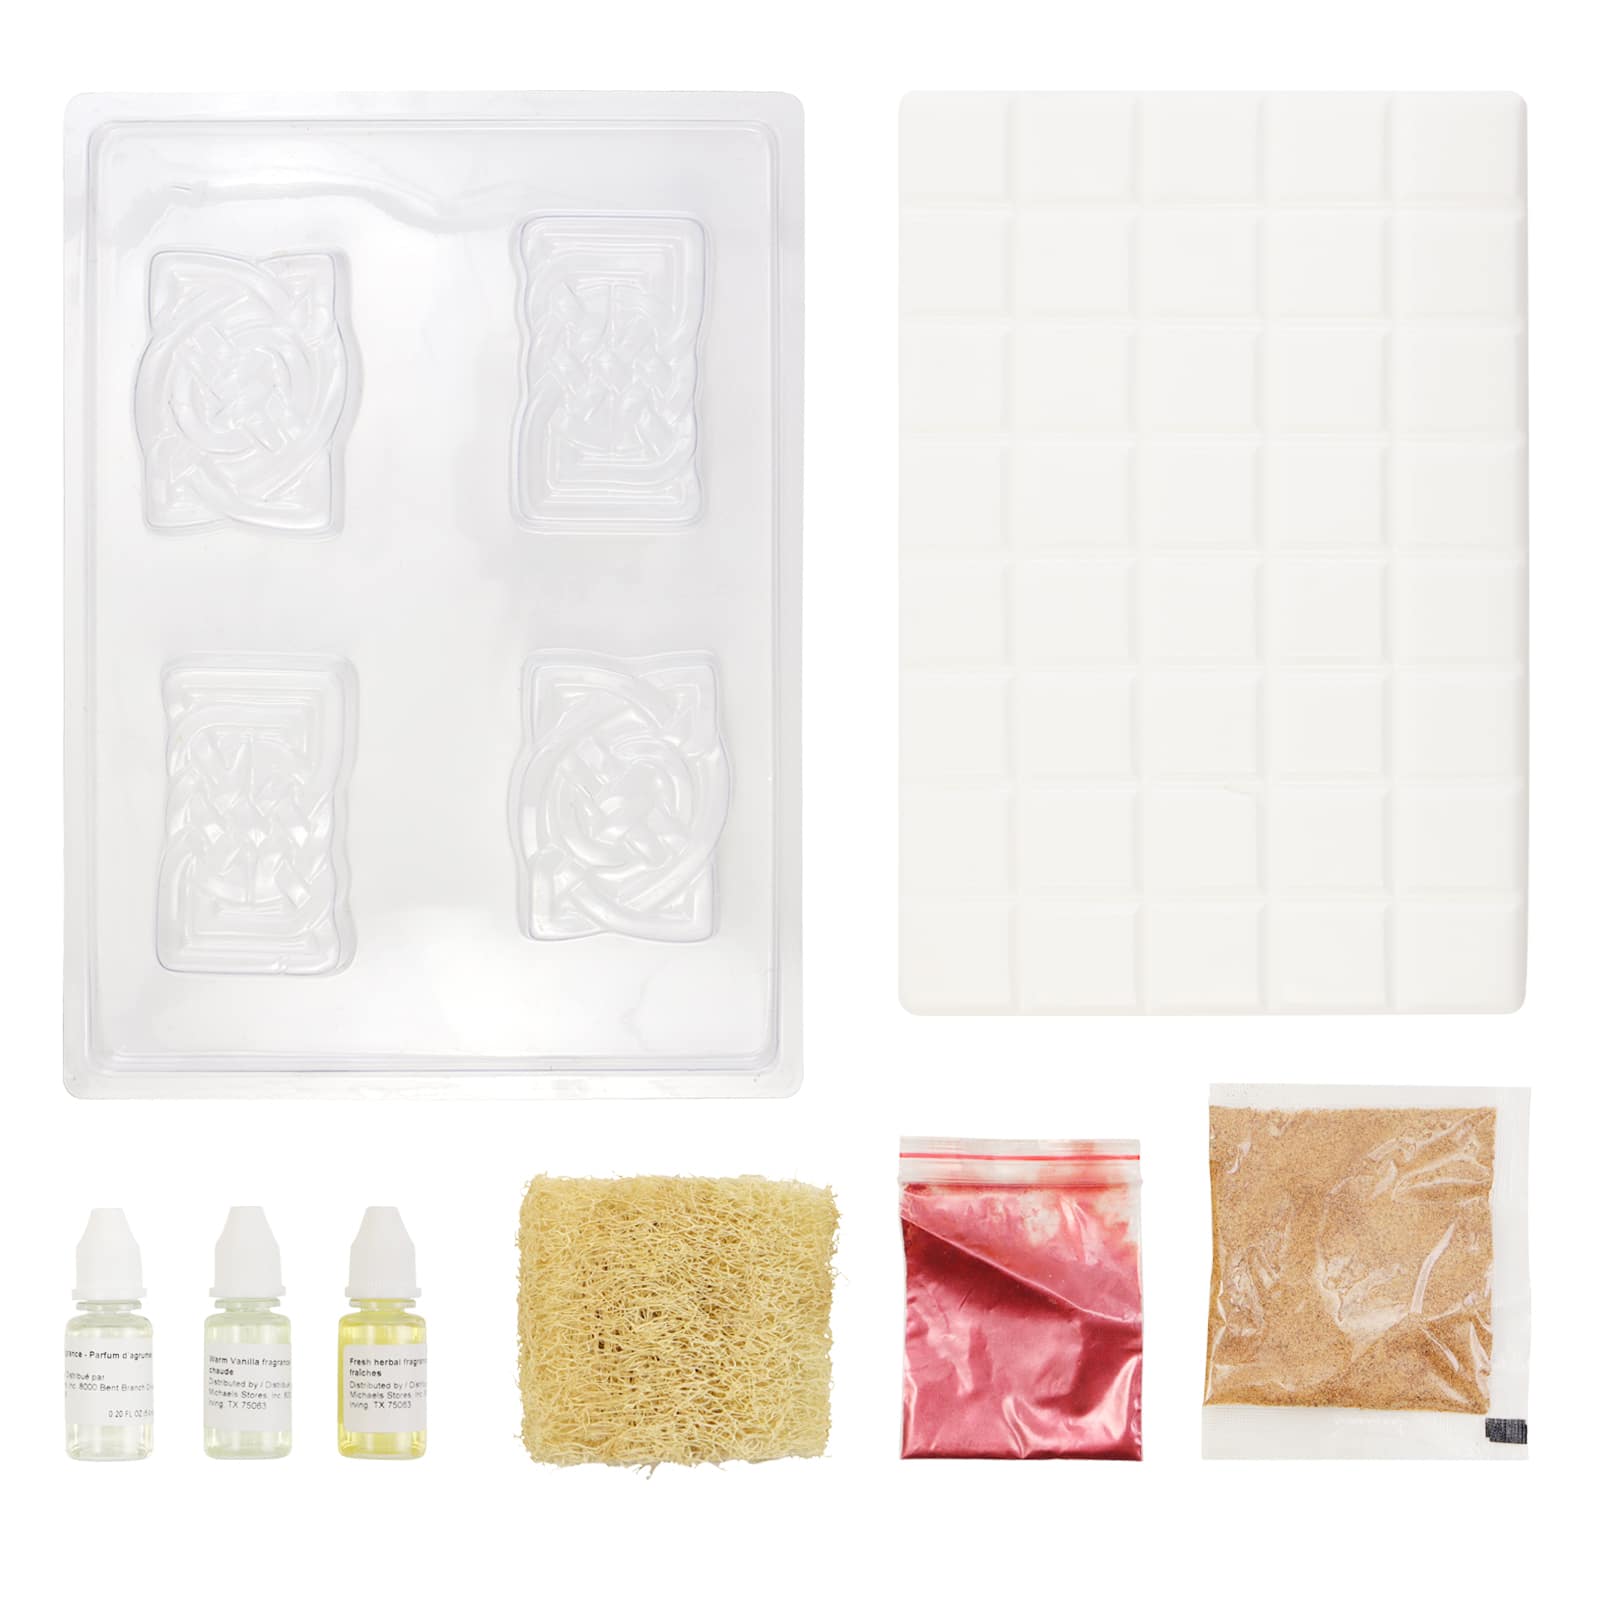 Decorative Soap Molds - Grow and Make